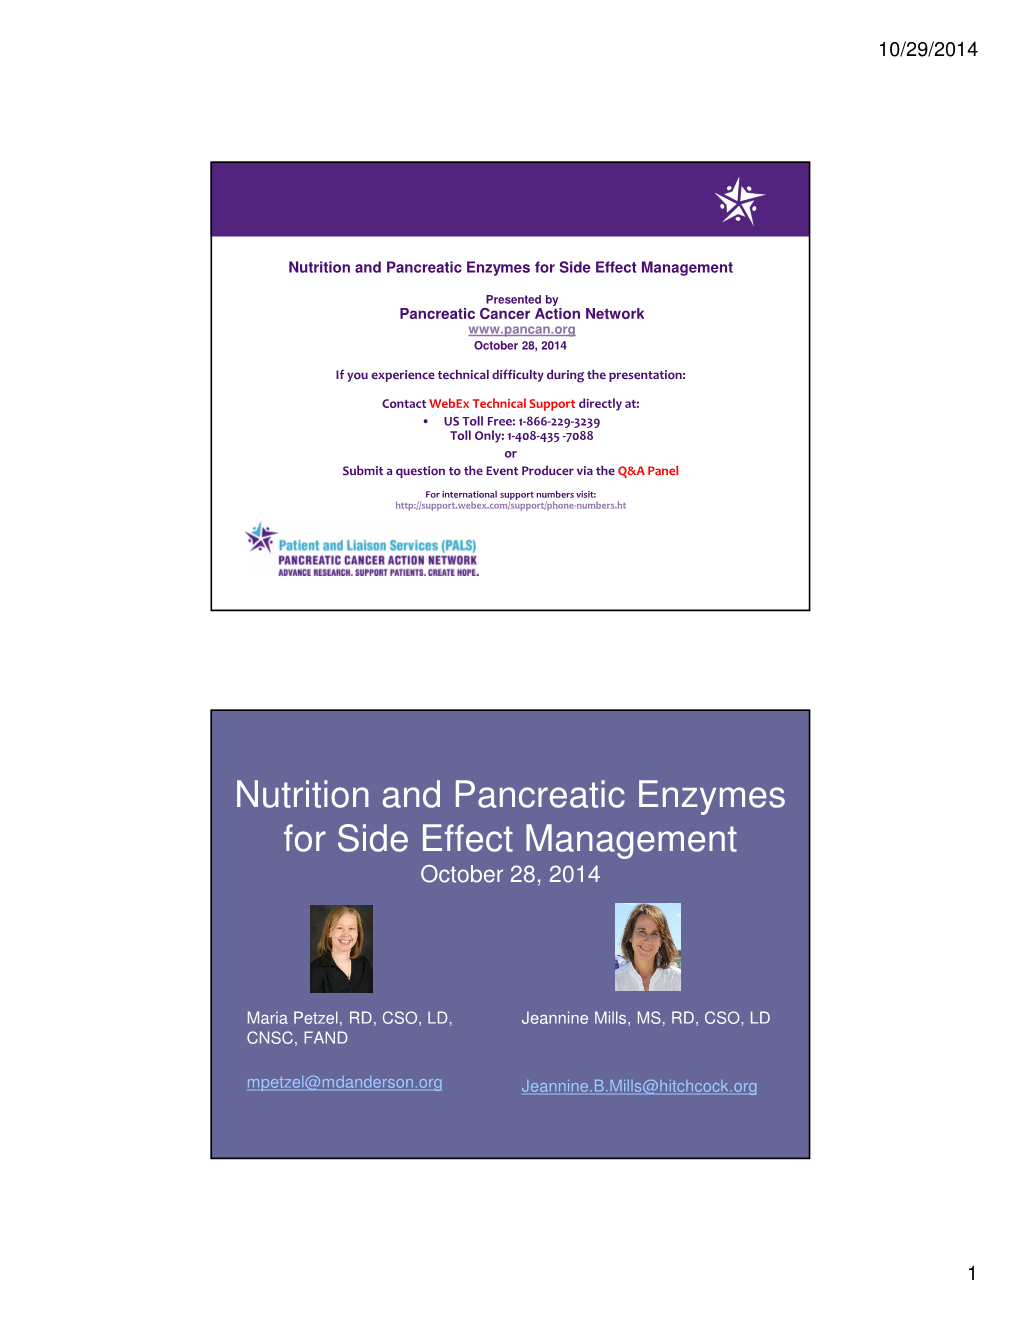 Nutrition and Pancreatic Enzymes for Side Effect Management